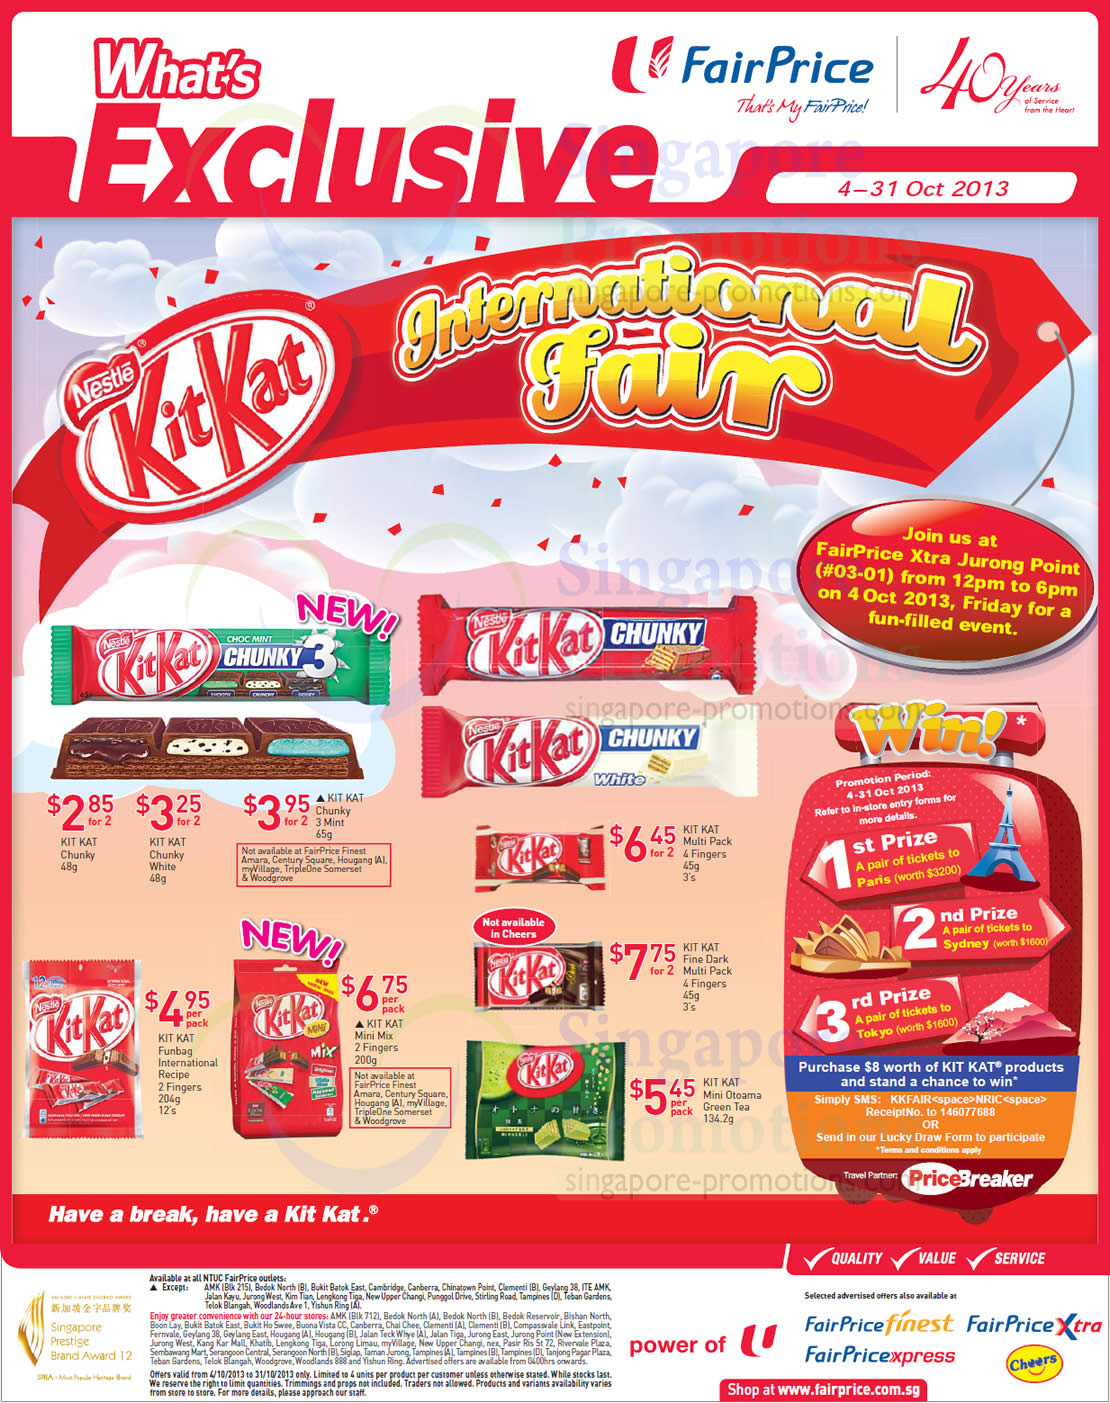 Featured image for NTUC Fairprice Groceries, Kit Kat, Philips LED Lightings & More Offers 3 - 17 Oct 2013